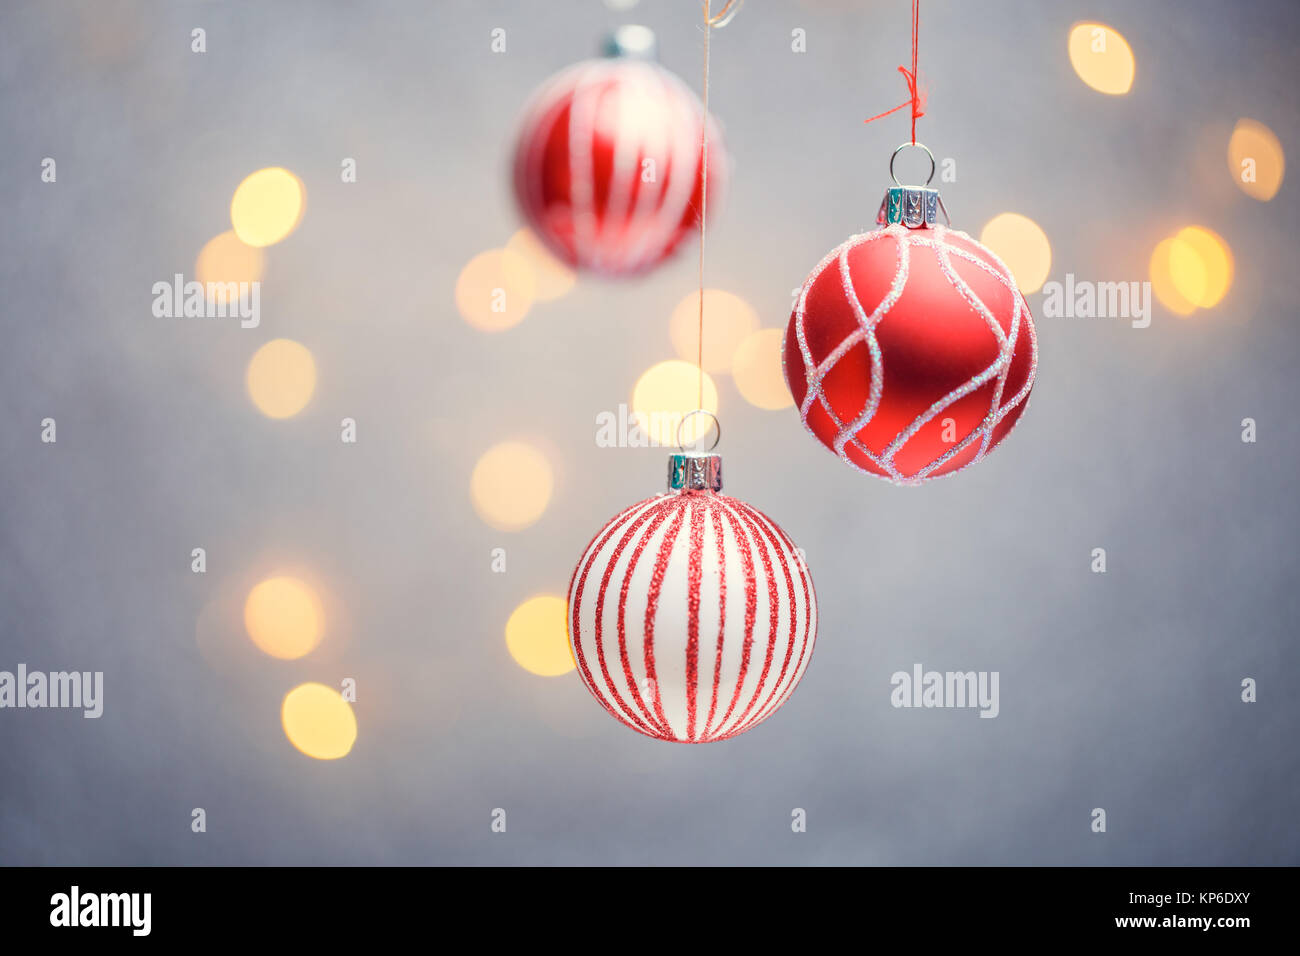 Photo of three Christmas tree red balls with pattern on gray background with hot lights. Stock Photo